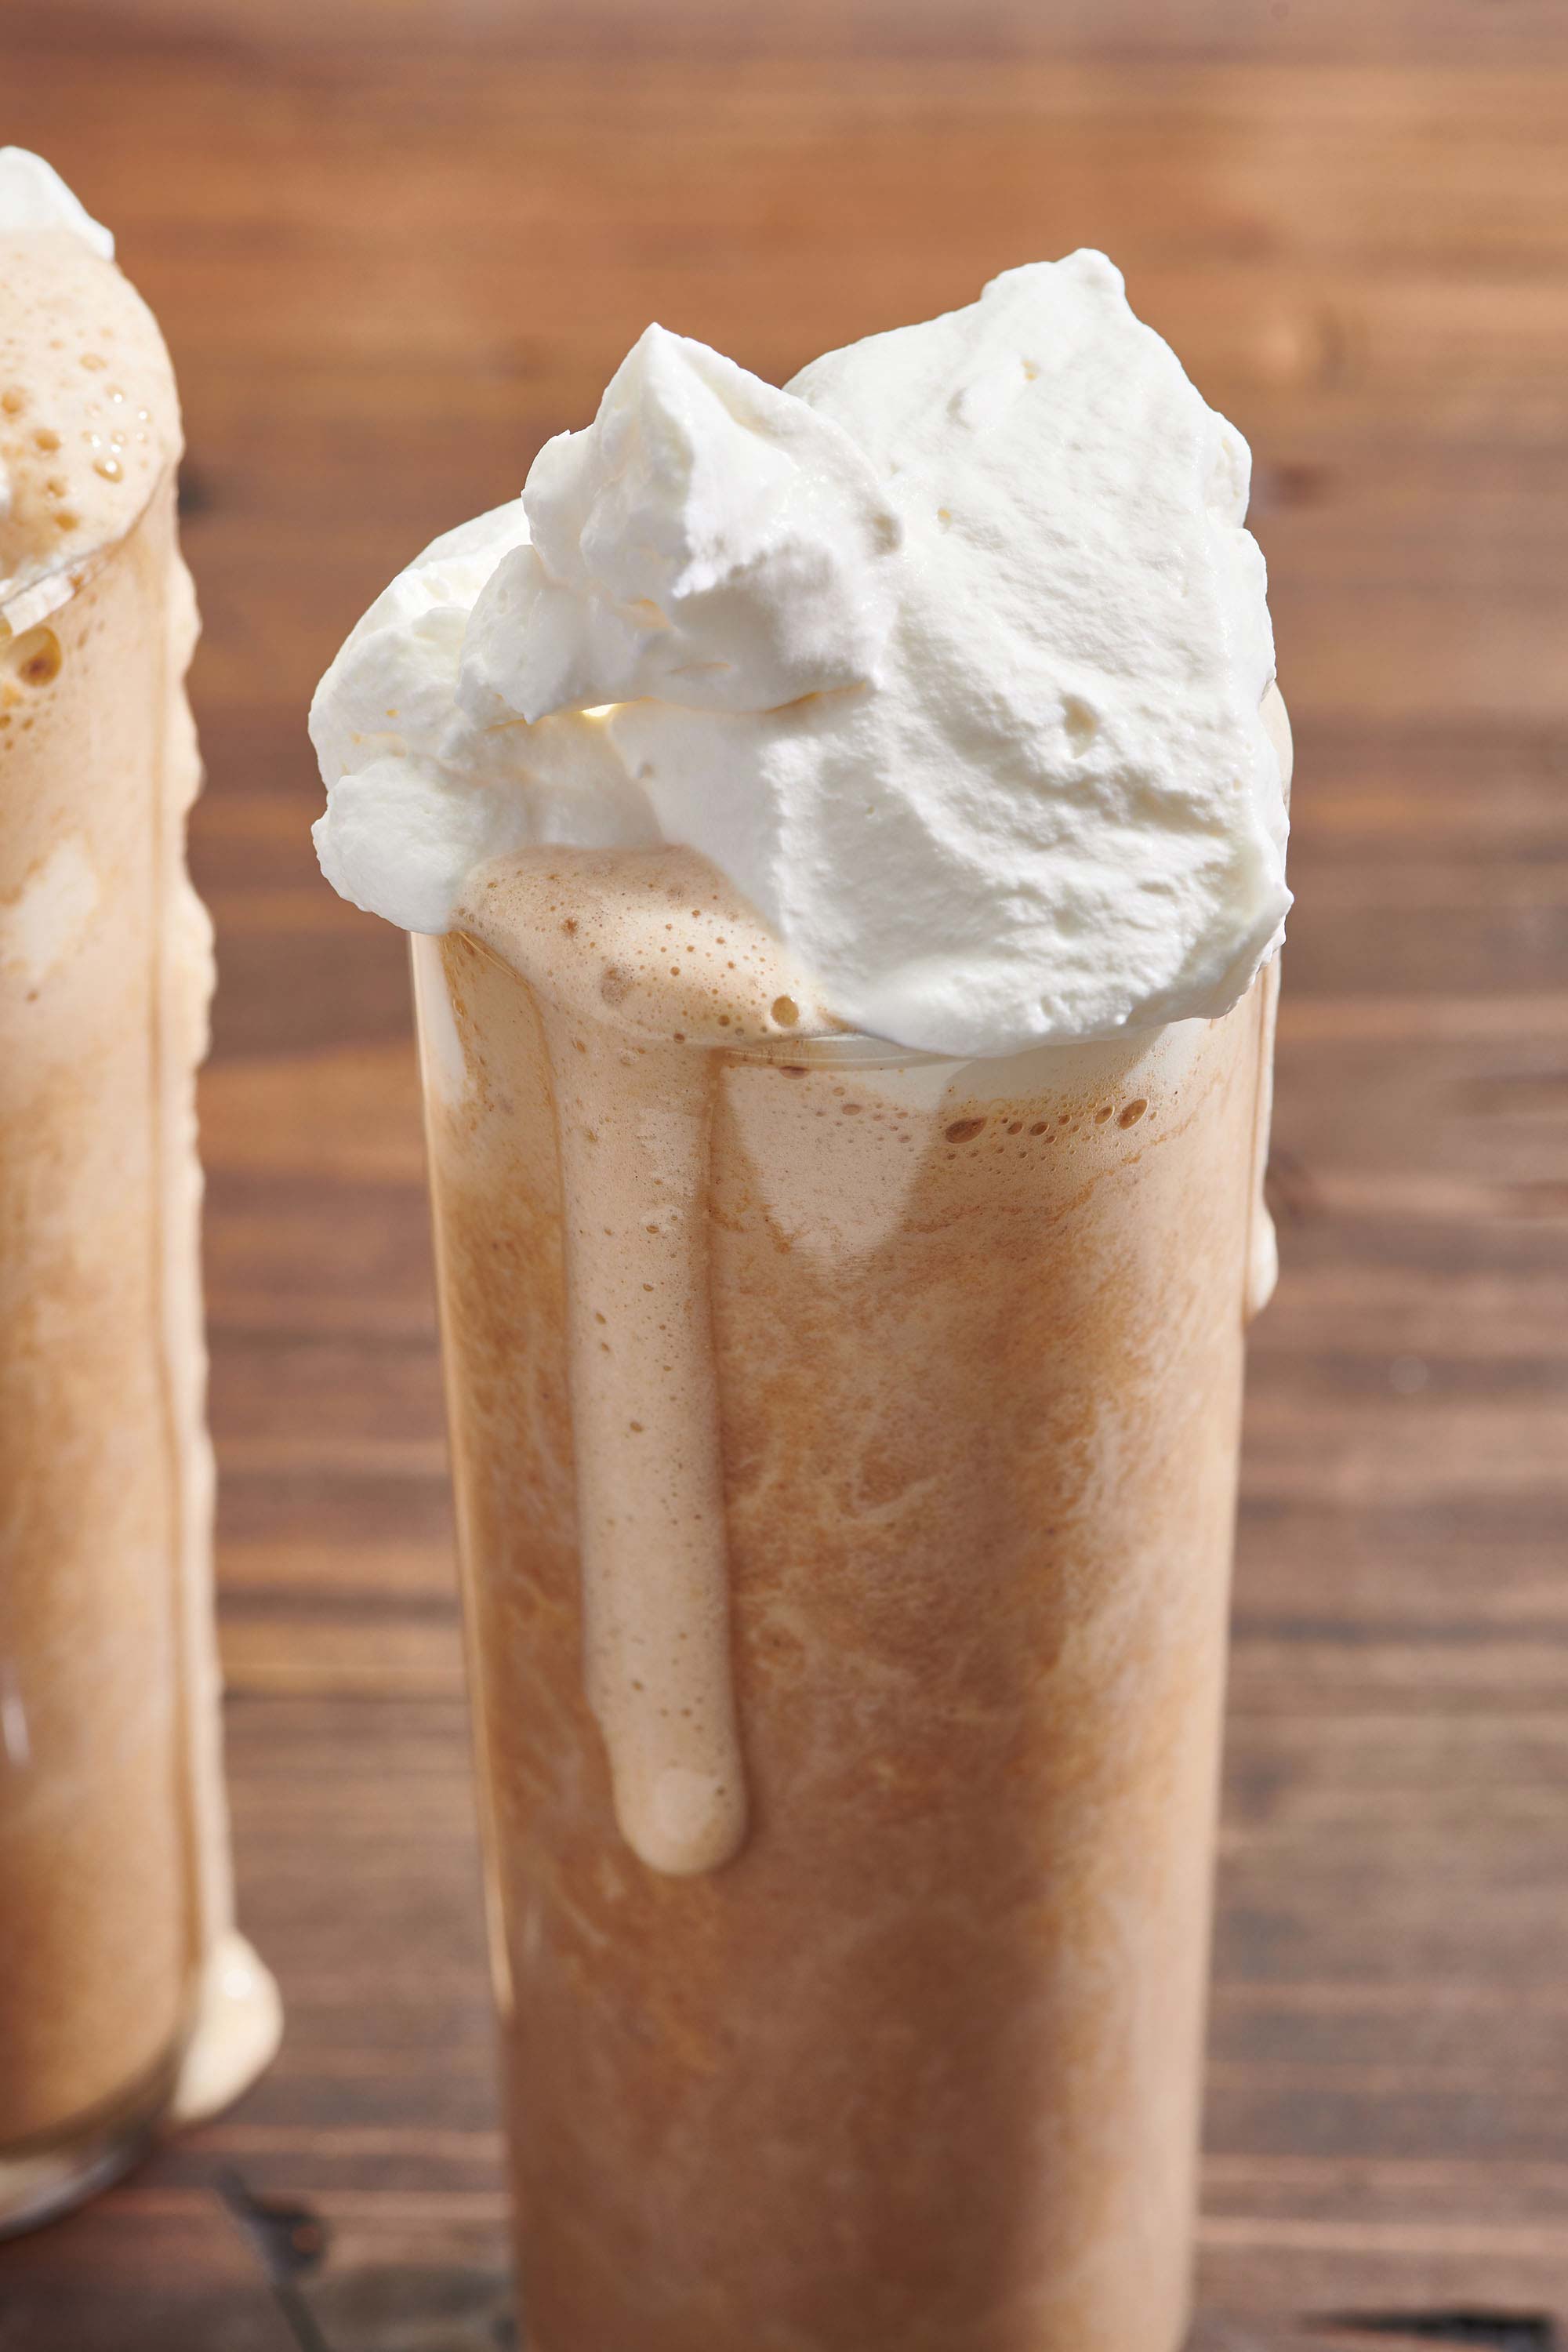 Iced Pumpkin Spice Latte topped with whipped cream dripping down the side of a glass.